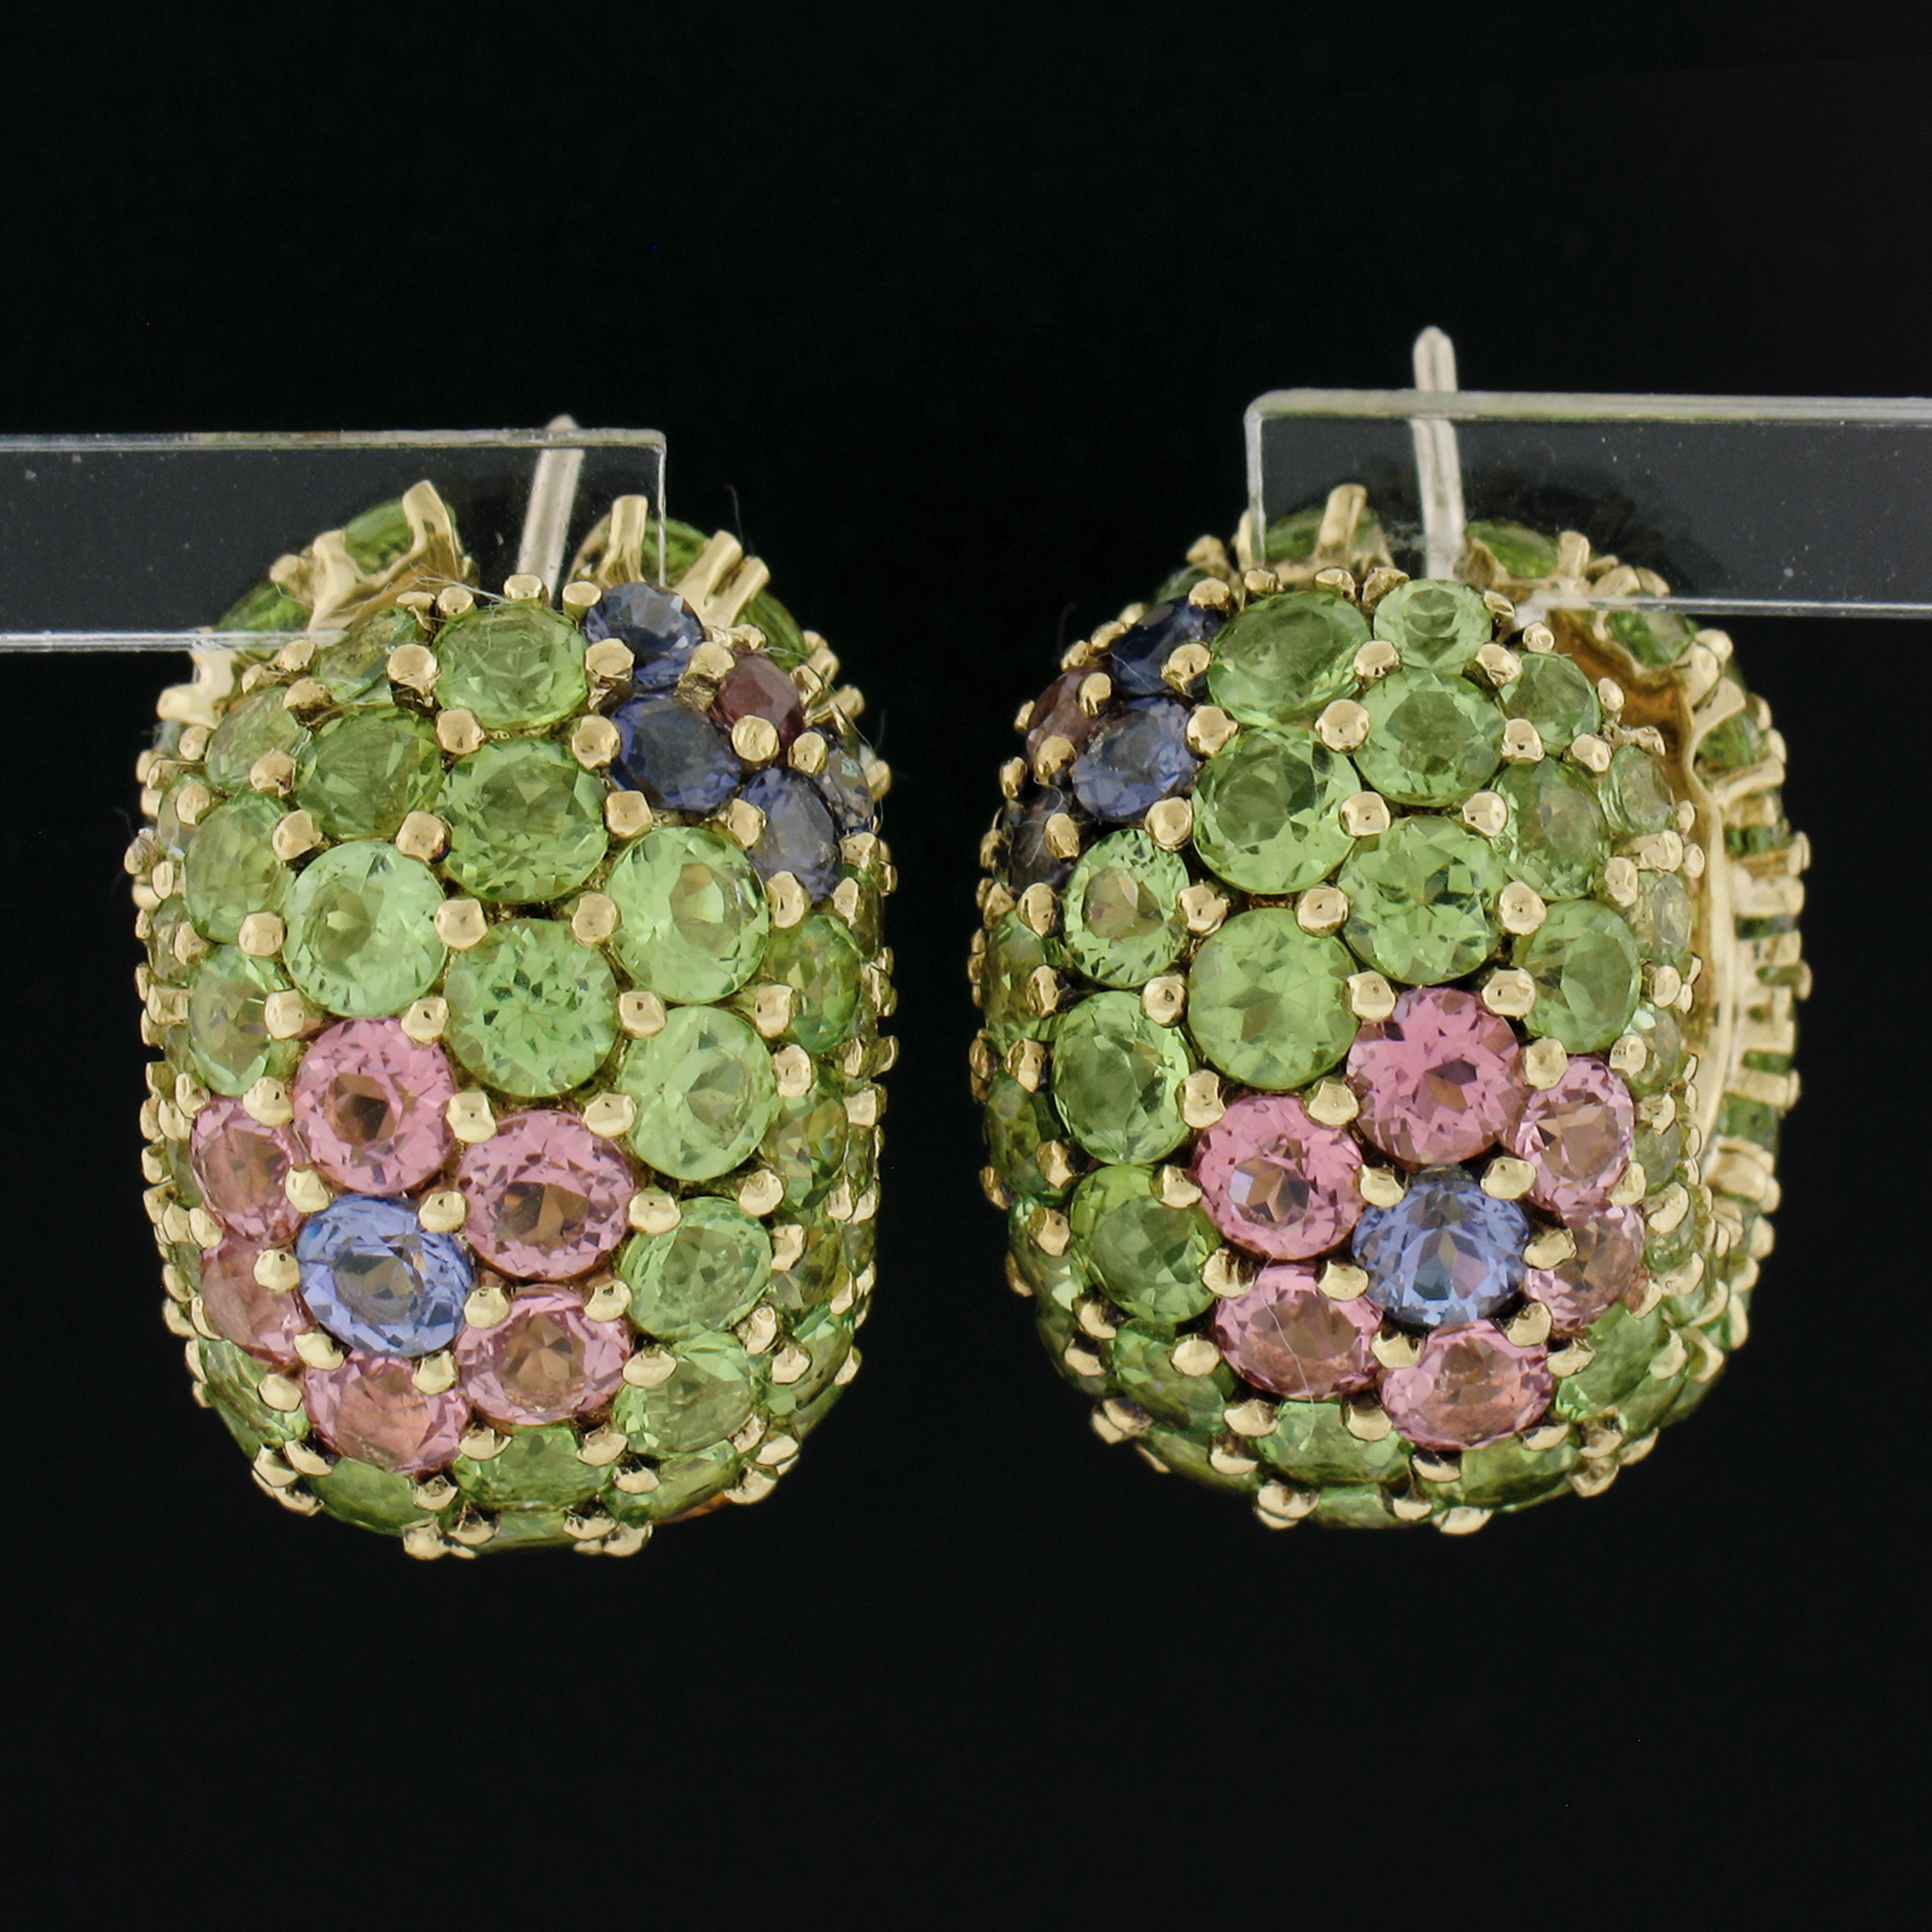 --Stone(s):--
Numerous Natural Genuine Peridots, Amethysts, Citrines, Iolites, & Pink Tourmalines - Round Brilliant Cut - Pave Set - Green, Purple, Orange, Blue & Pink Colors

Material: Solid 18k Yellow Gold
Weight: 23.54 Grams
Backing: Posts w/